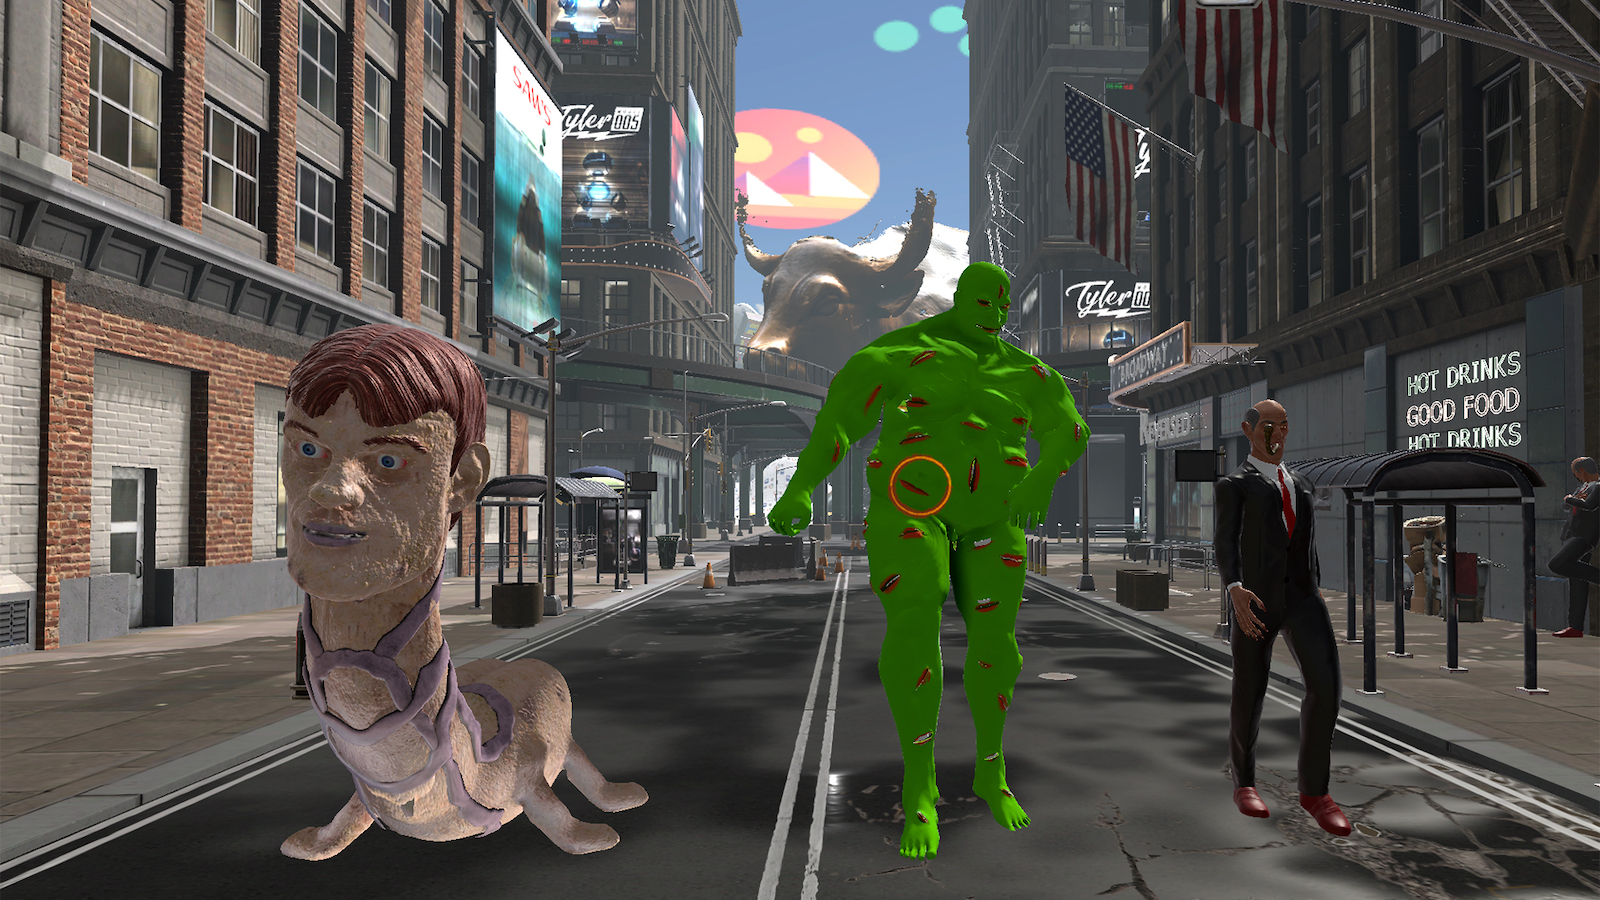 Strange creatures, including a green giant and a huge worm with a human head, walk down an empty New York City street in an animated video game world.